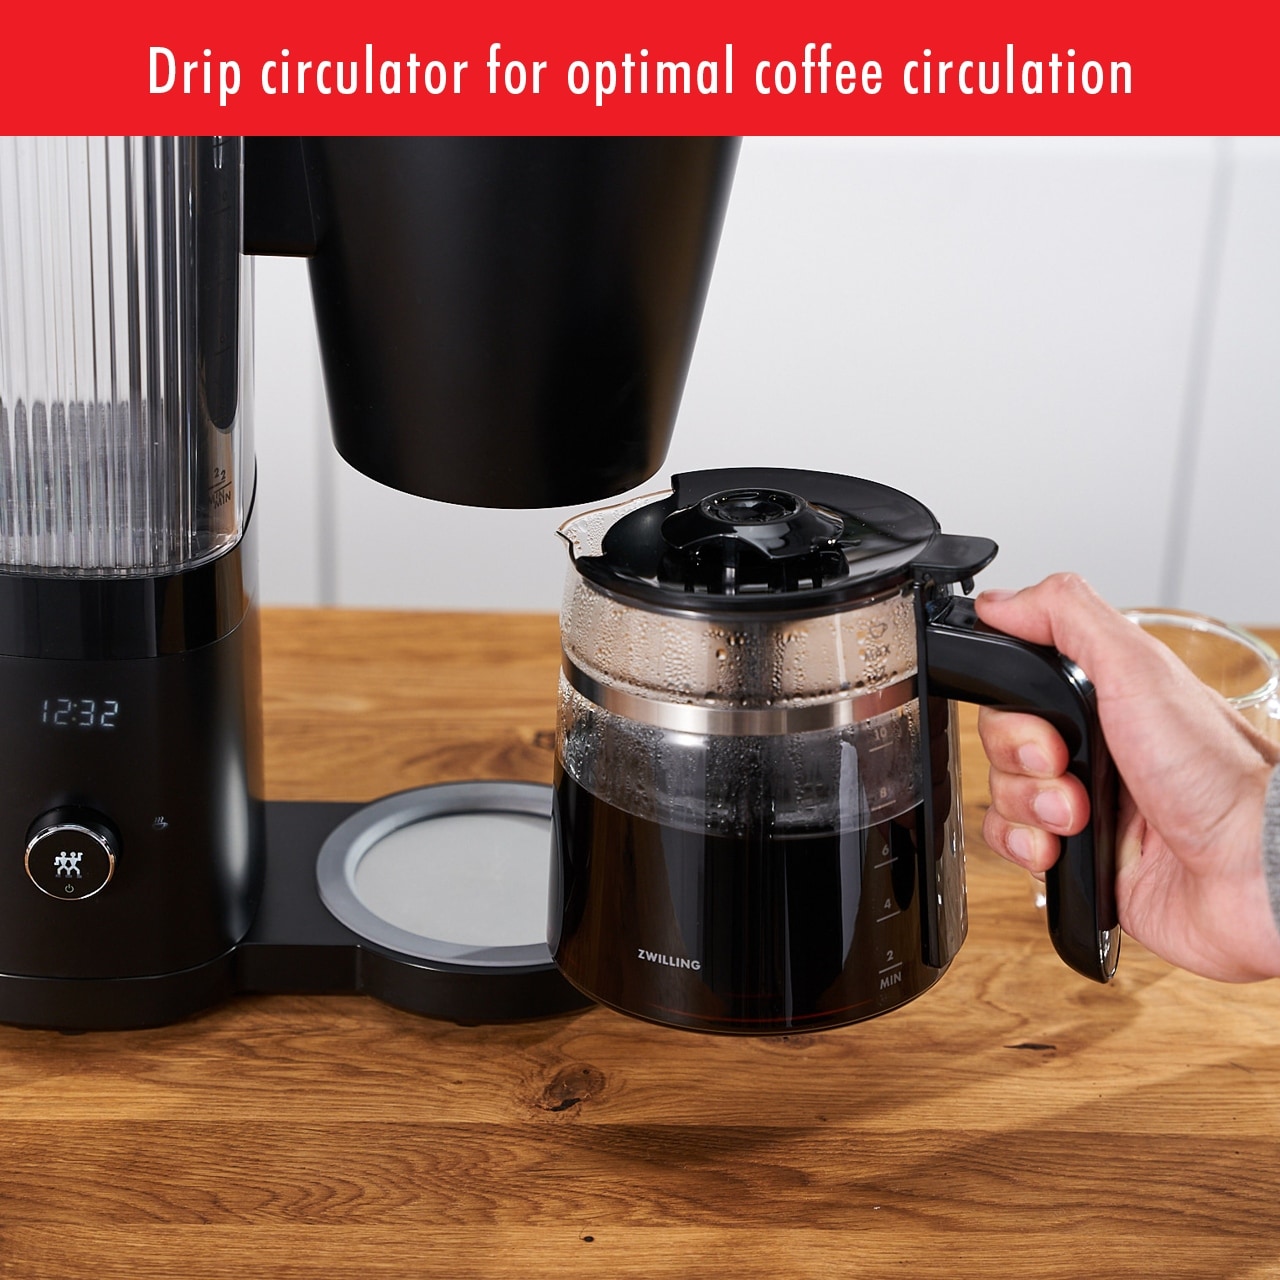 https://ak1.ostkcdn.com/images/products/is/images/direct/f5cbe5cd76e9aee02cfa25e7ce5f7776d2112ba8/ZWILLING-Enfinigy-Glass-Drip-Coffee-Maker-12-Cup%2C-Black.jpg